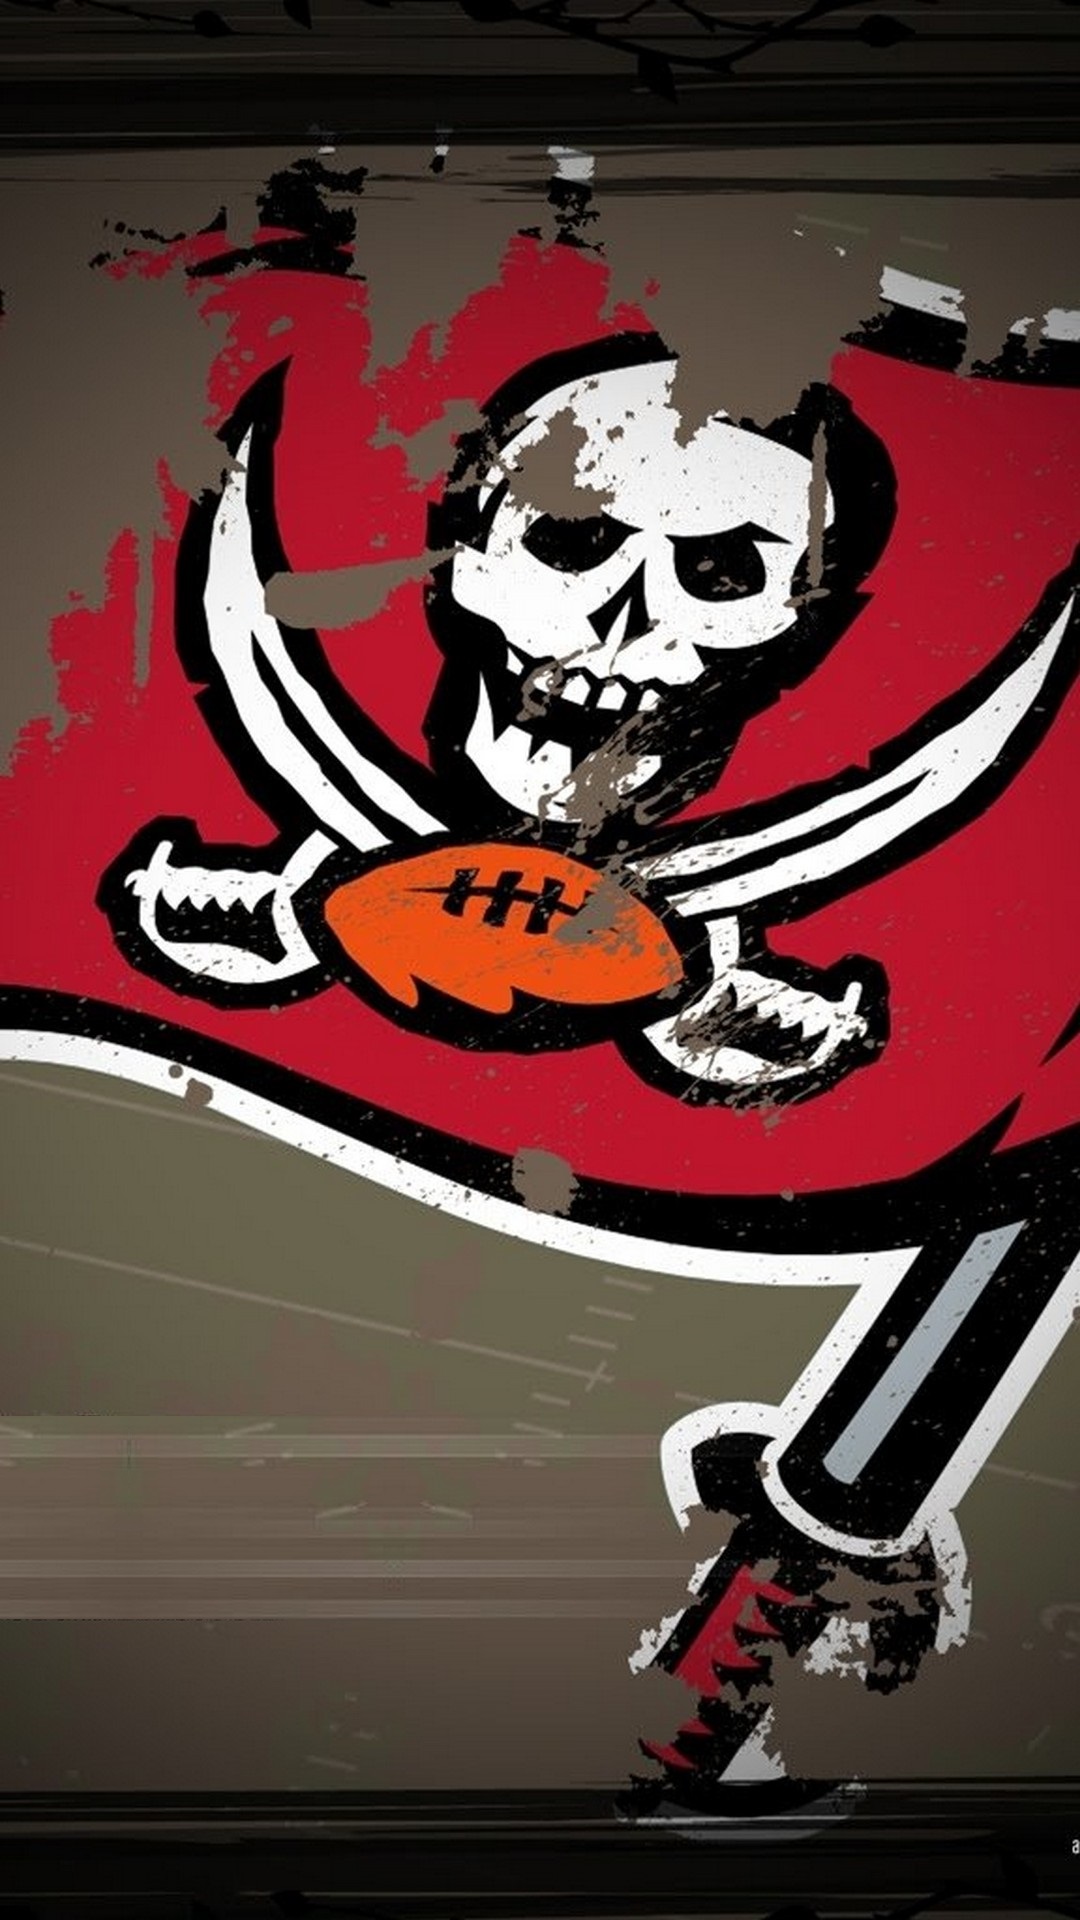 Tampa Bay Buccaneers Wallpaper Mobile with high-resolution 1080x1920 pixel. You can use this wallpaper for your Mac or Windows Desktop Background, iPhone, Android or Tablet and another Smartphone device